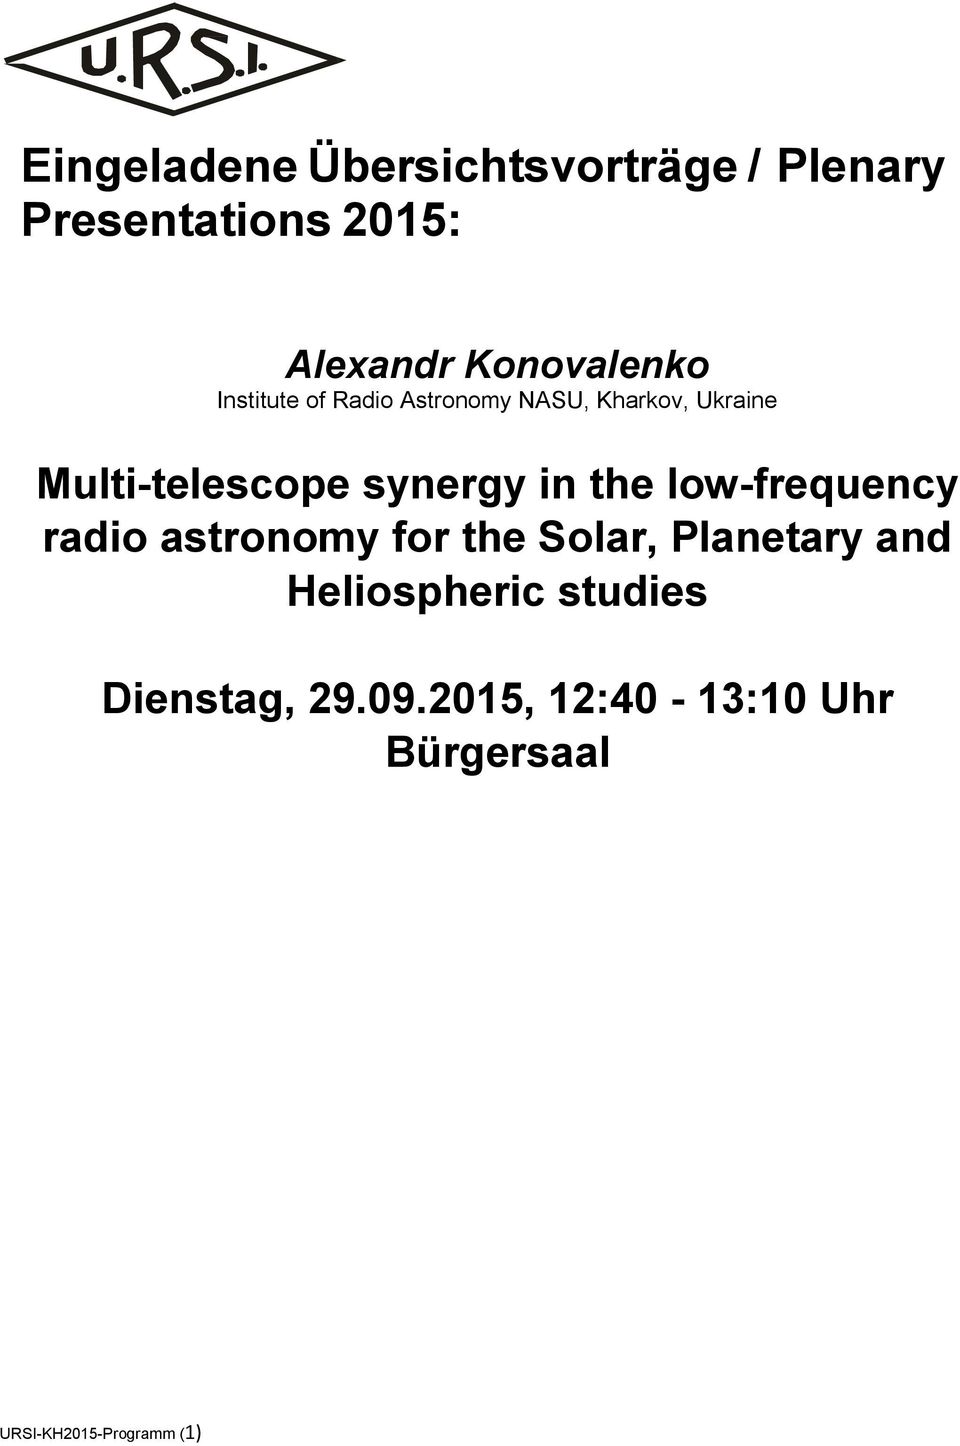 Multi-telescope synergy in the low-frequency radio astronomy for the